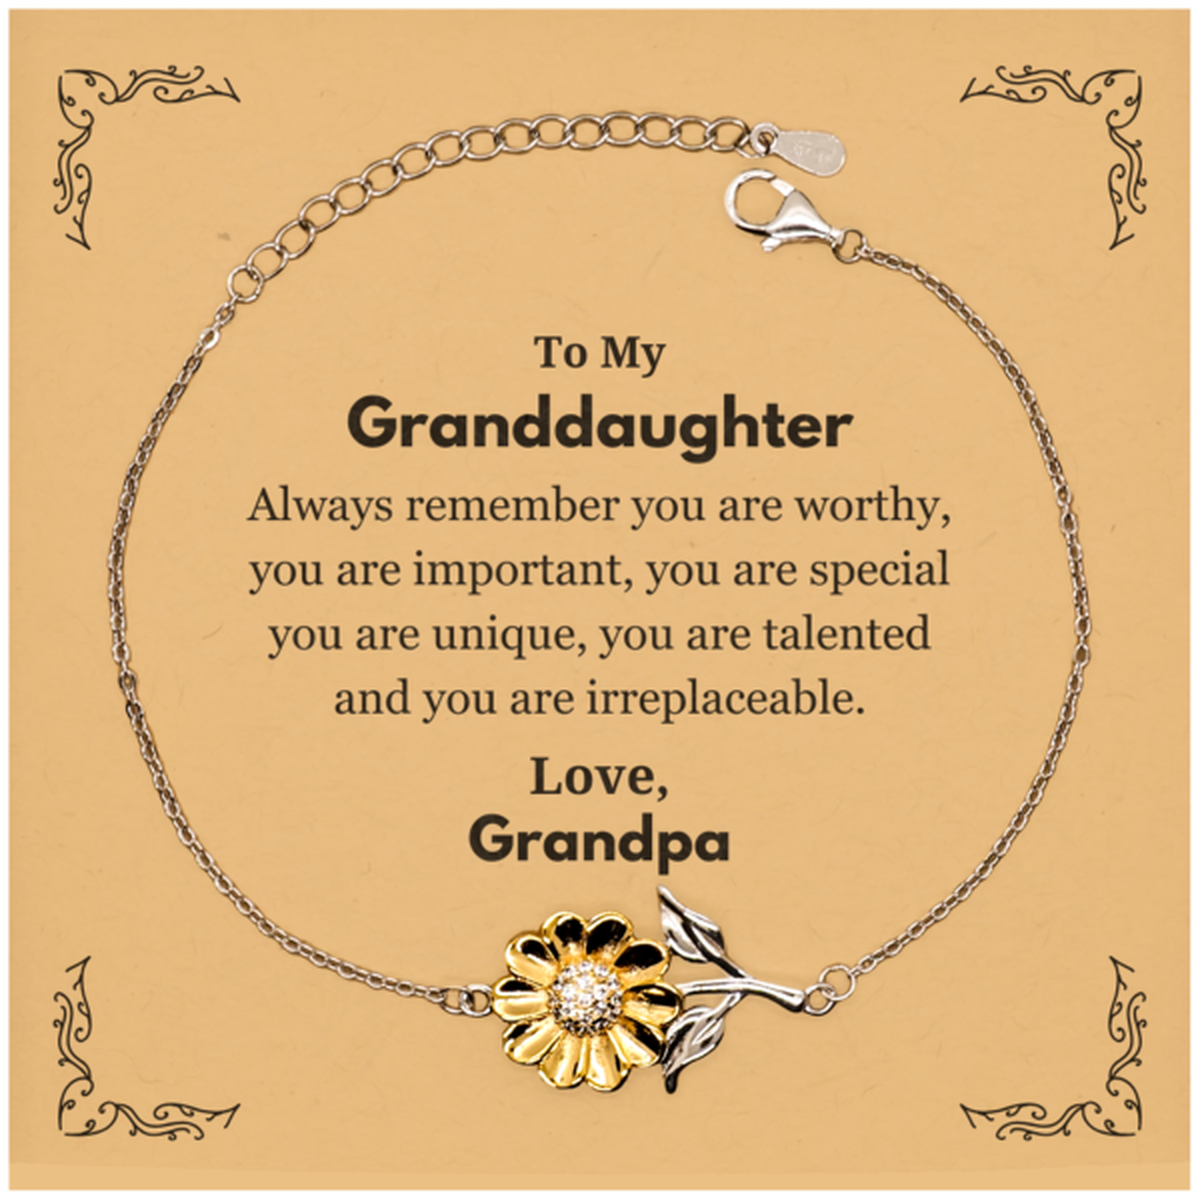 Granddaughter Birthday Gifts from Grandpa, Inspirational Sunflower Bracelet for Granddaughter Christmas Graduation Gifts for Granddaughter Always remember you are worthy, you are important. Love, Grandpa